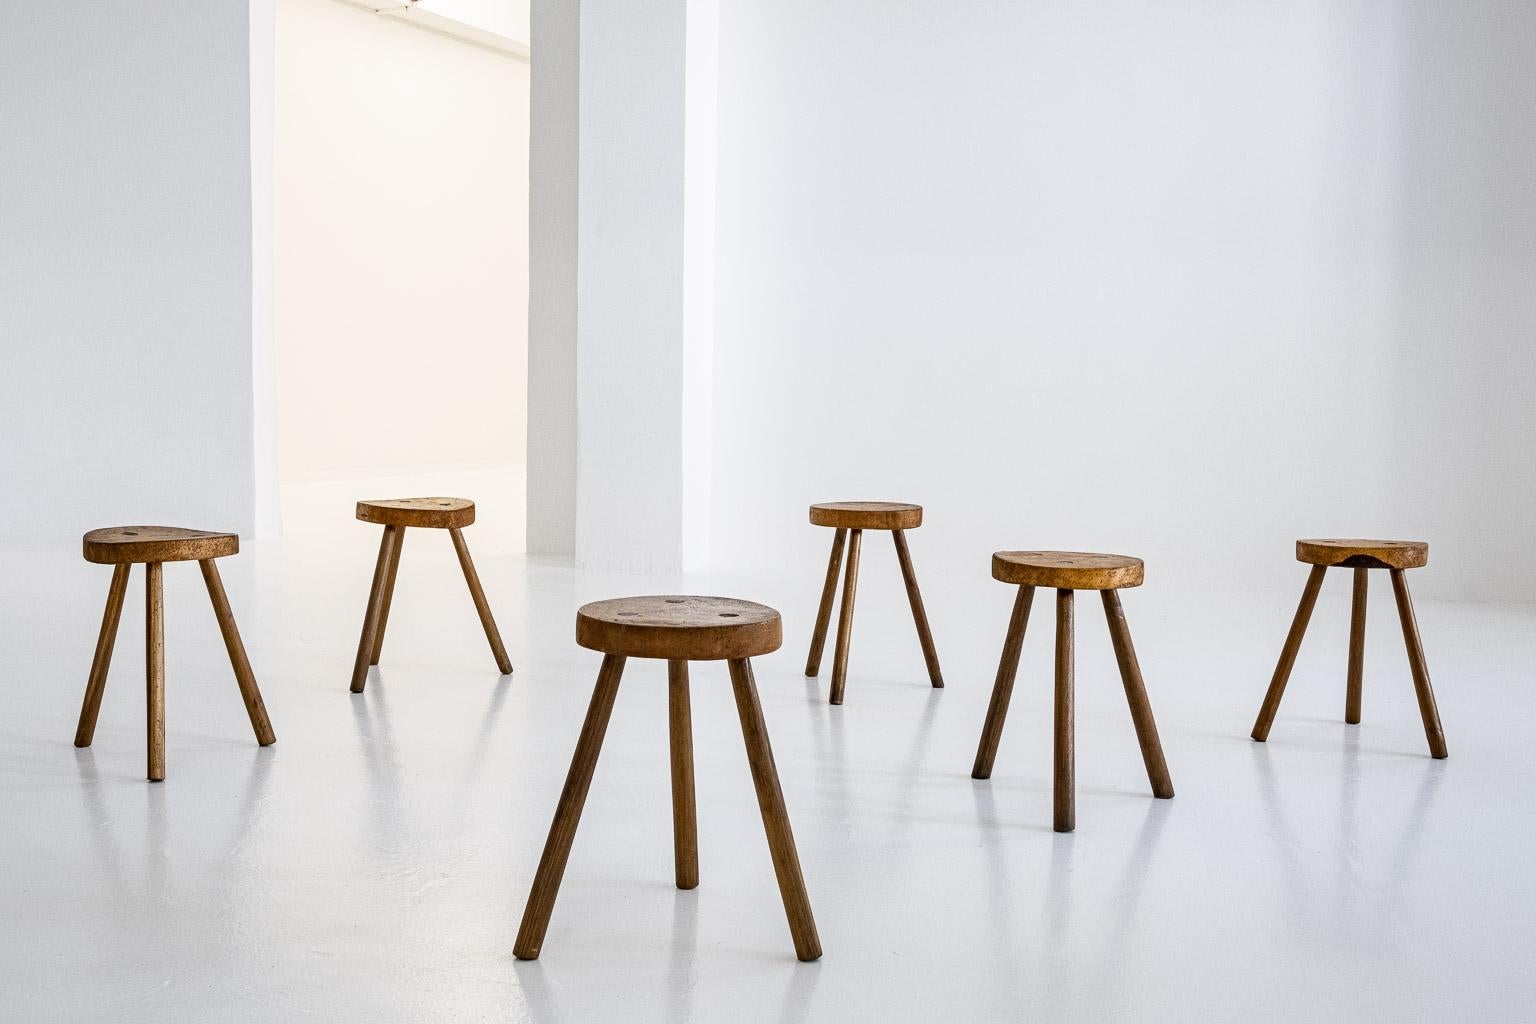 Set of 6, Wooden, Brutalist Tripod Stools or Side Tables, Italy, ca. 1960s In Good Condition For Sale In Frankfurt am Main, DE